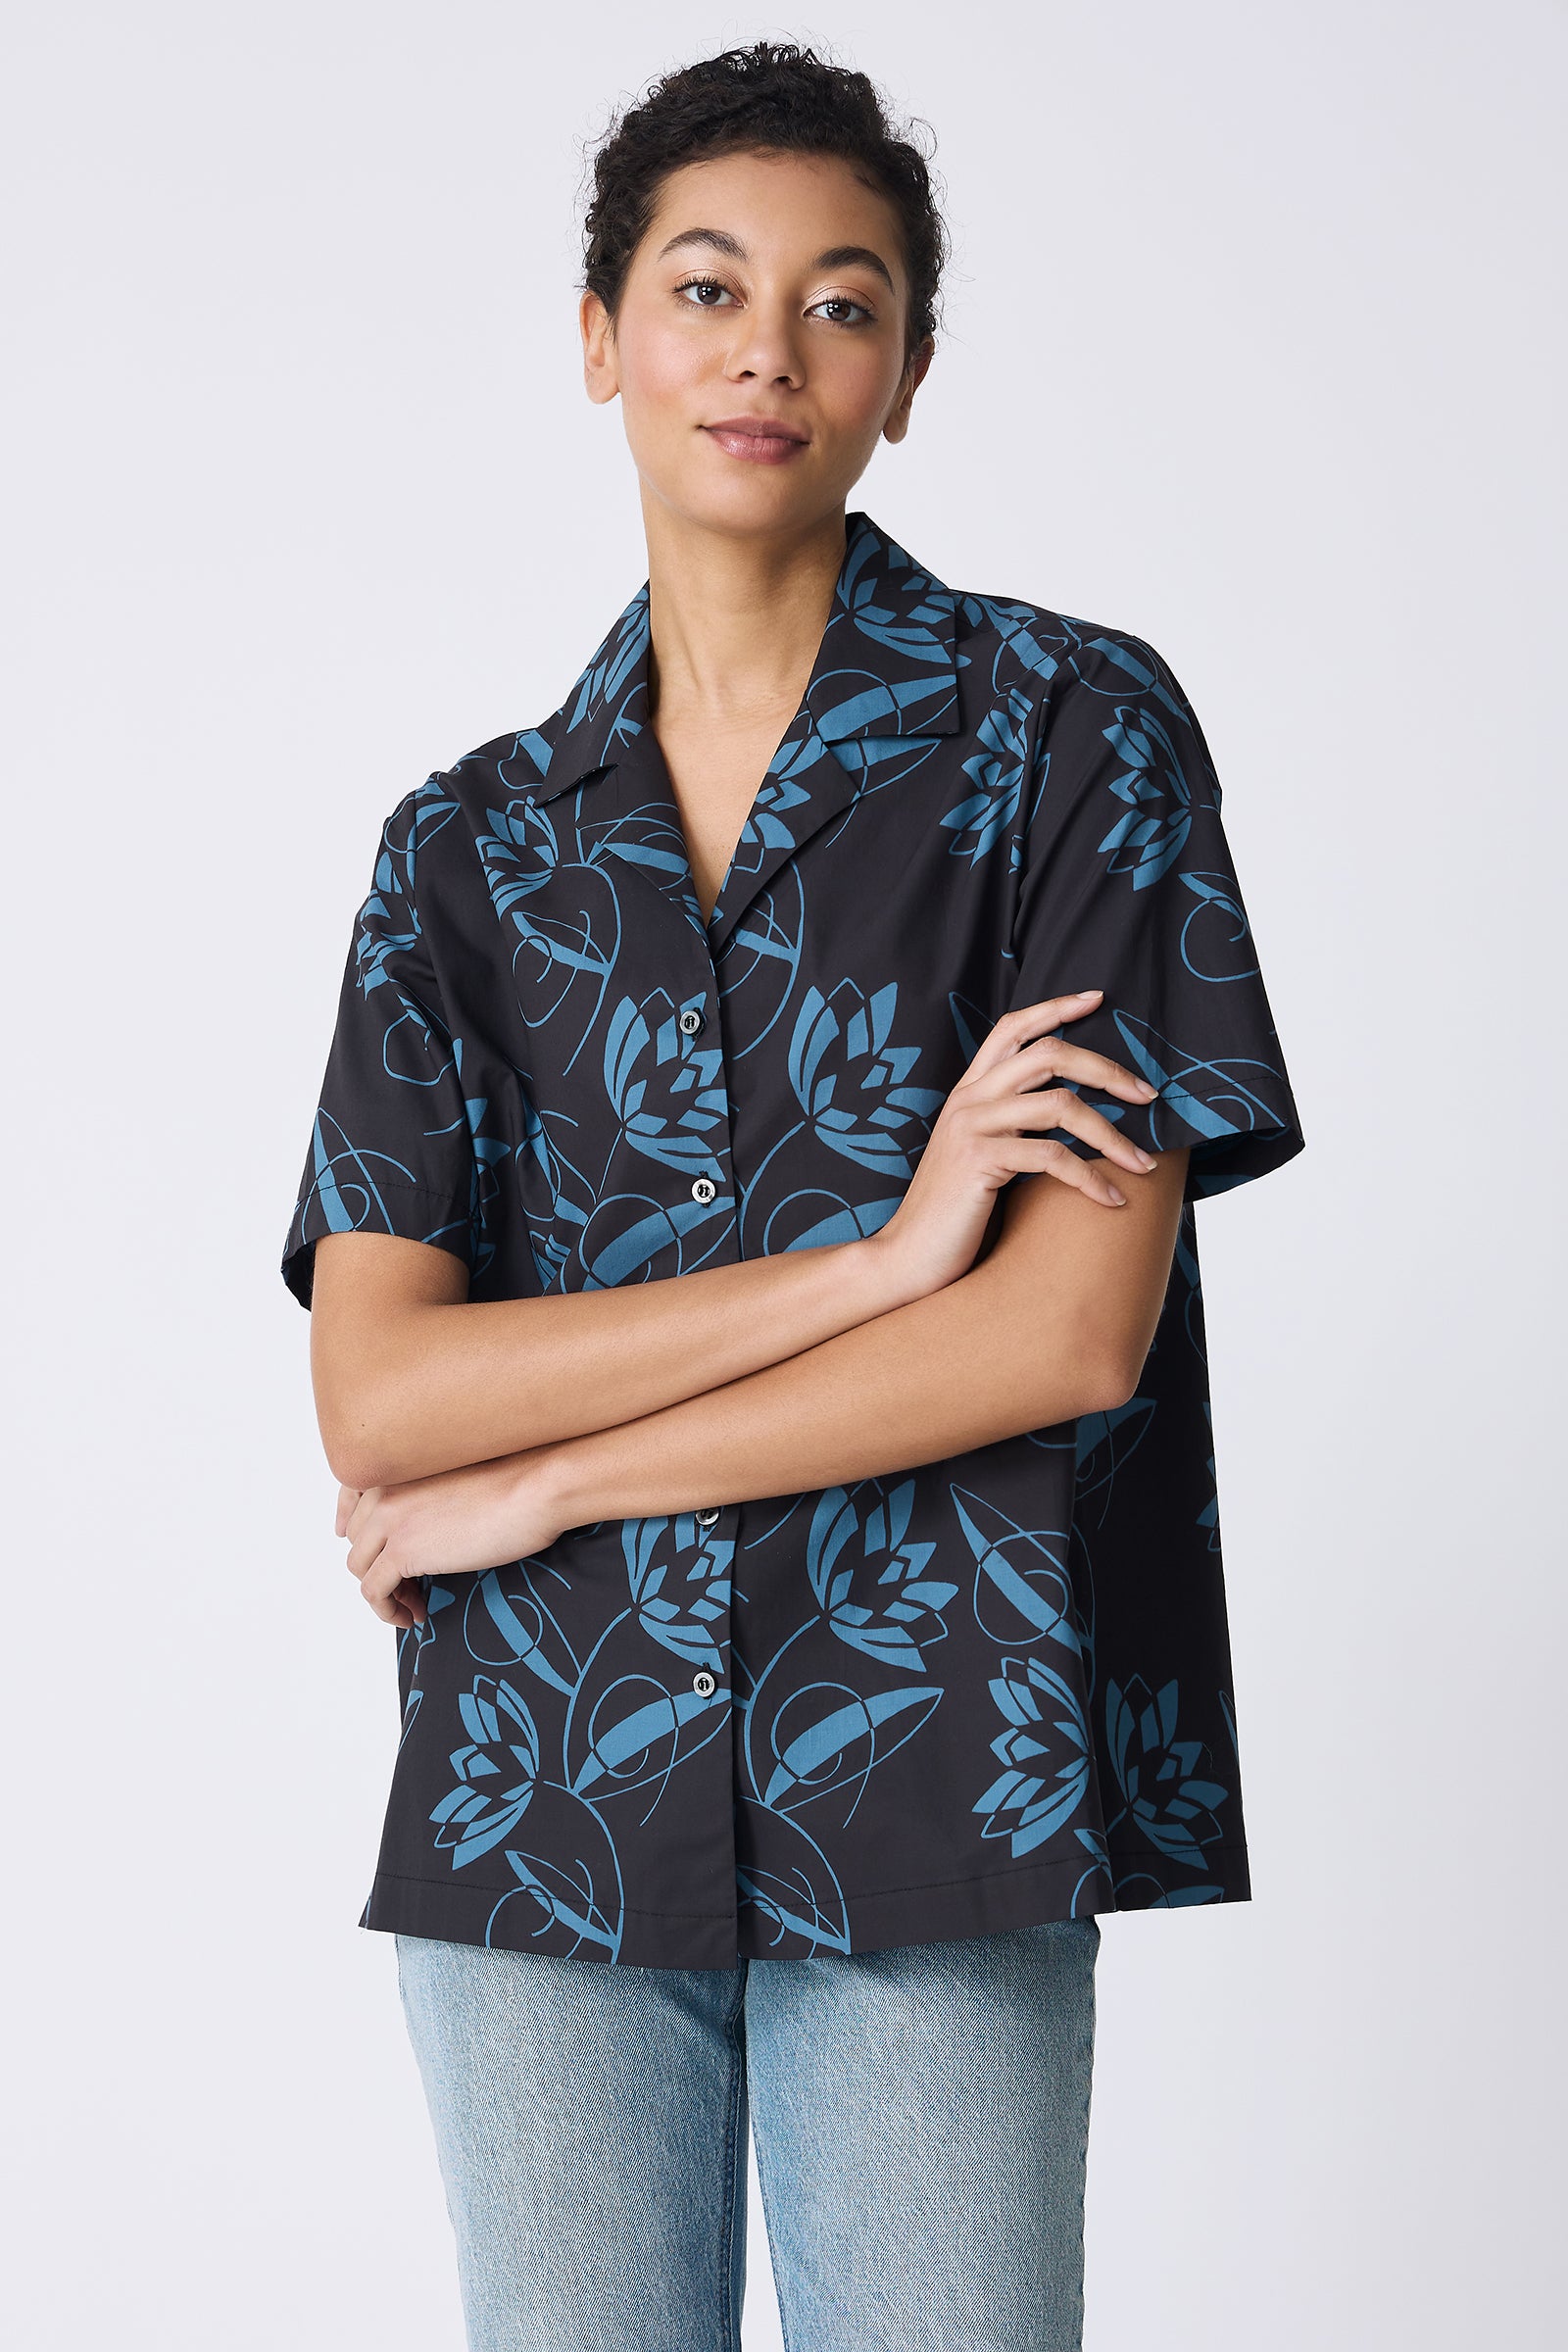 Kal Rieman Vacation Shirt in Lotus Print Blue on model with arms crossed front view